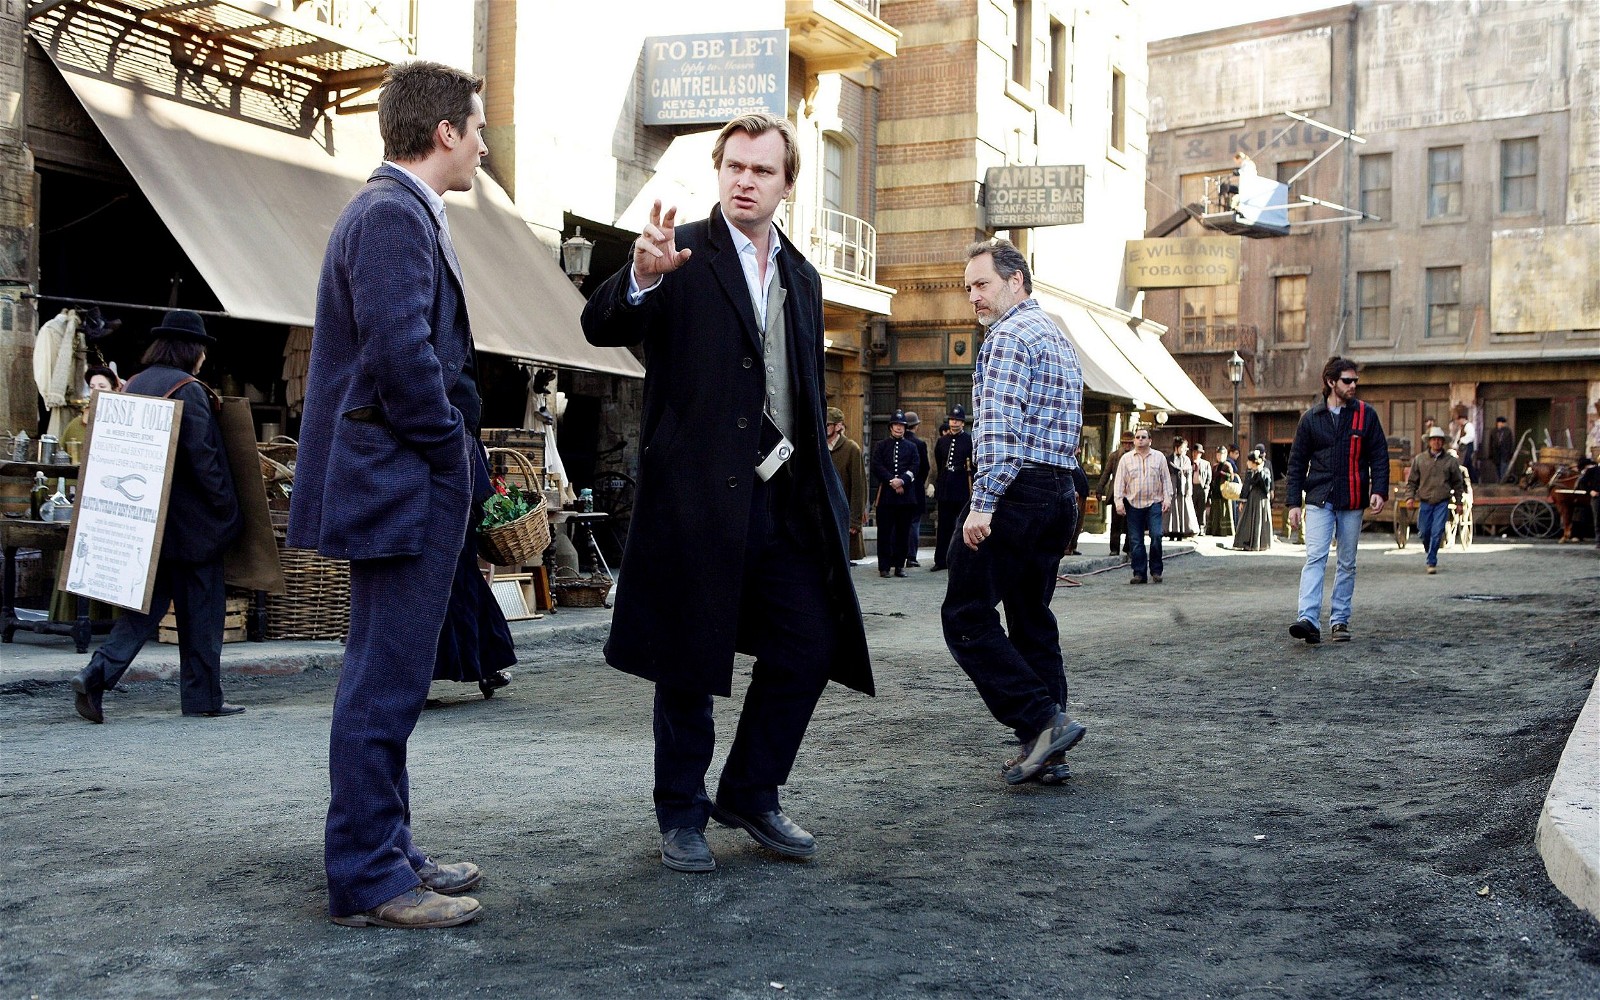 Christian Bale and Christopher Nolan on the sets of The Prestige (2006).